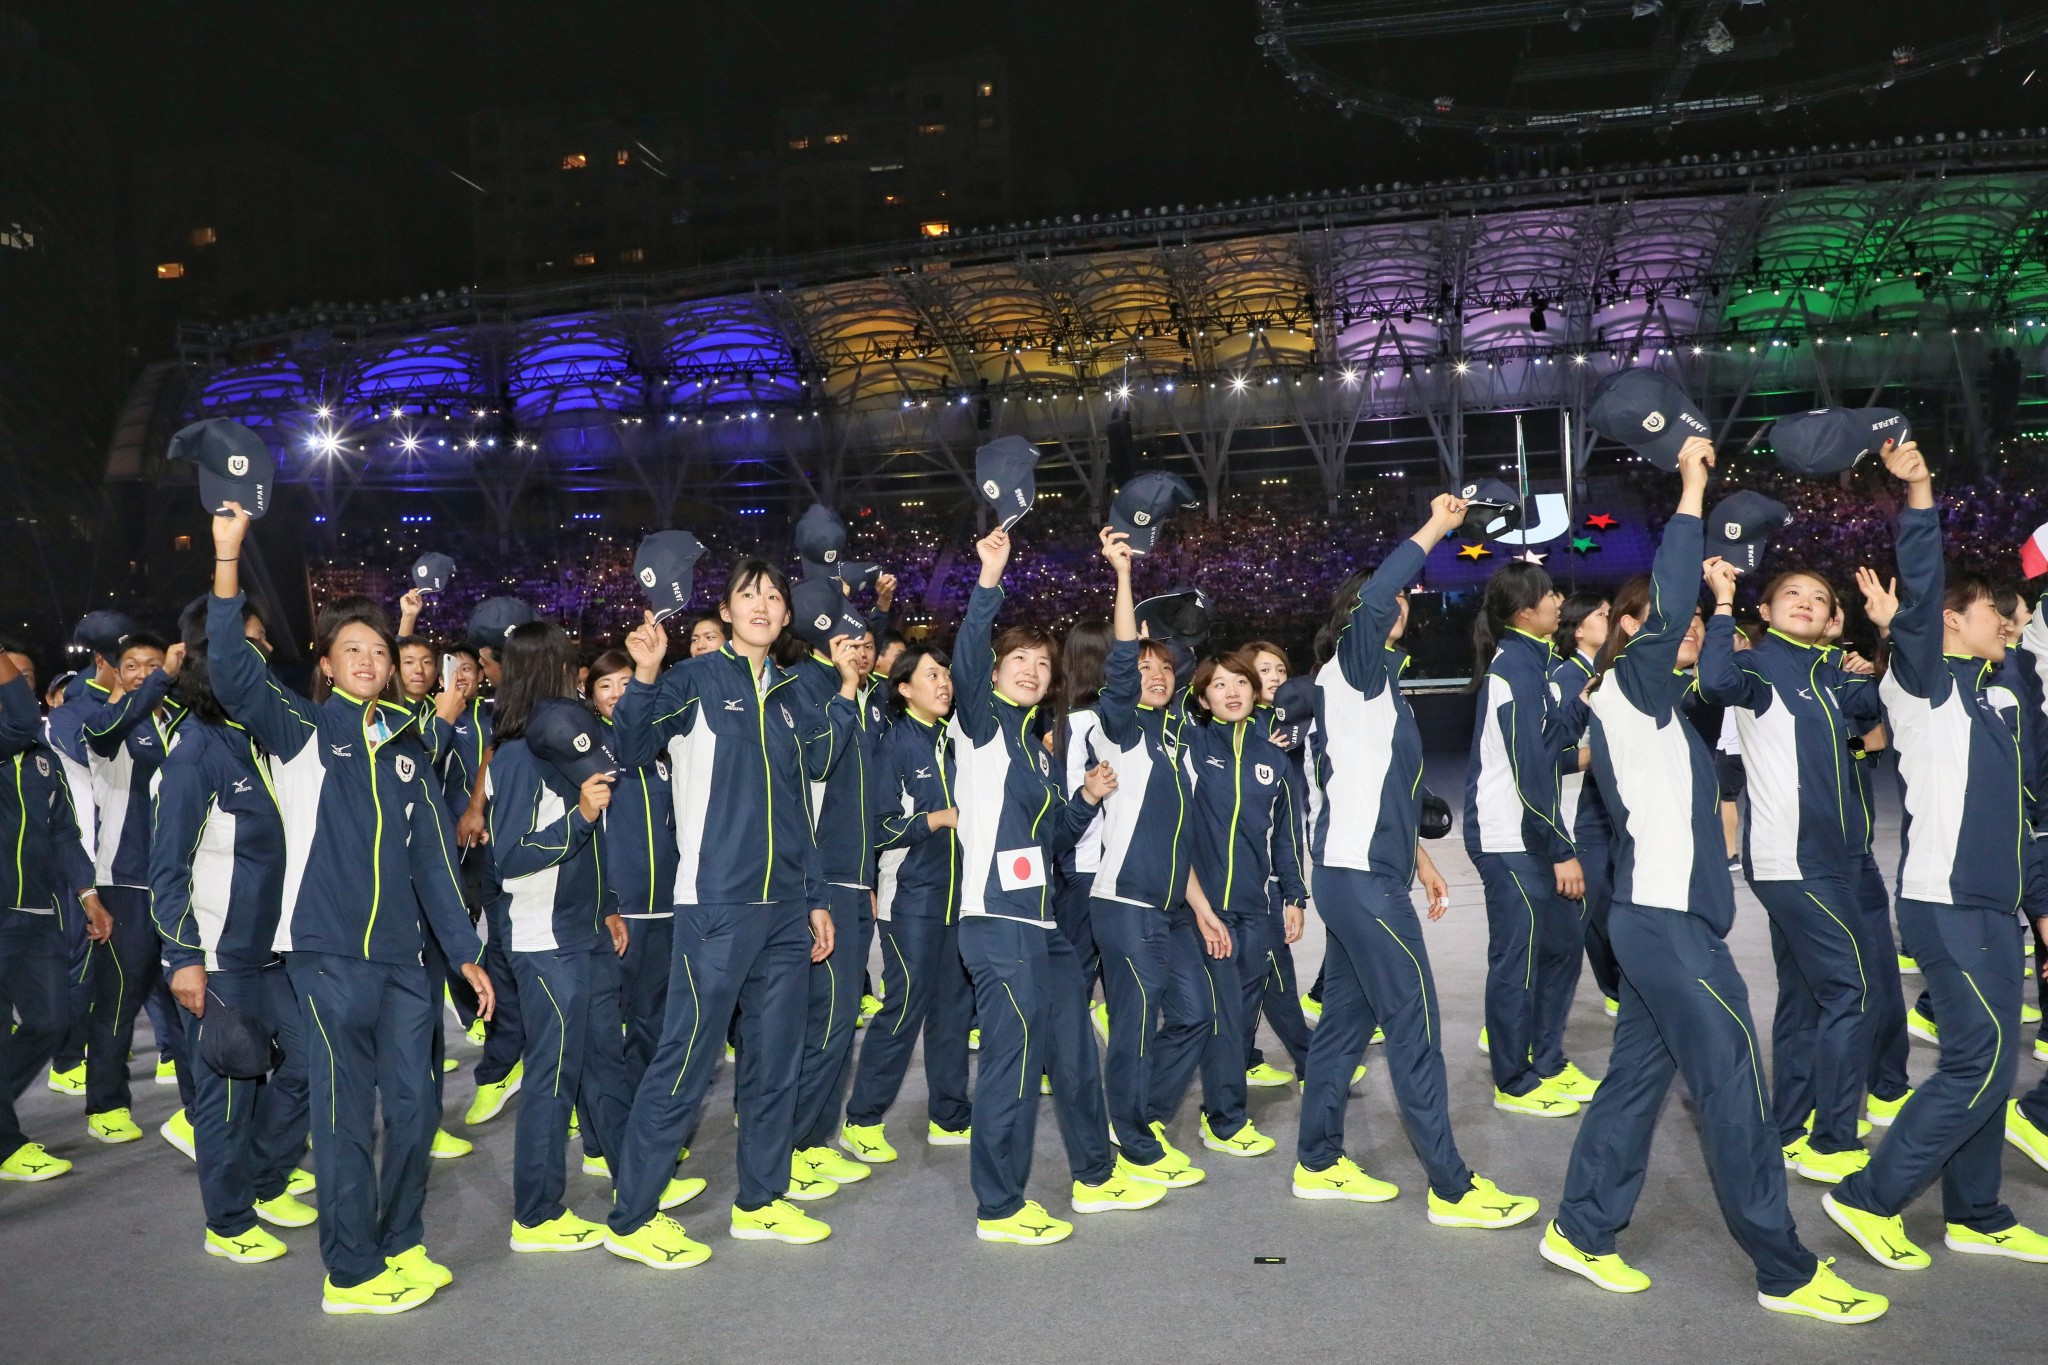 Eventually local authorities controlled the protests and teams could enter the stadium ©Taipei 2017